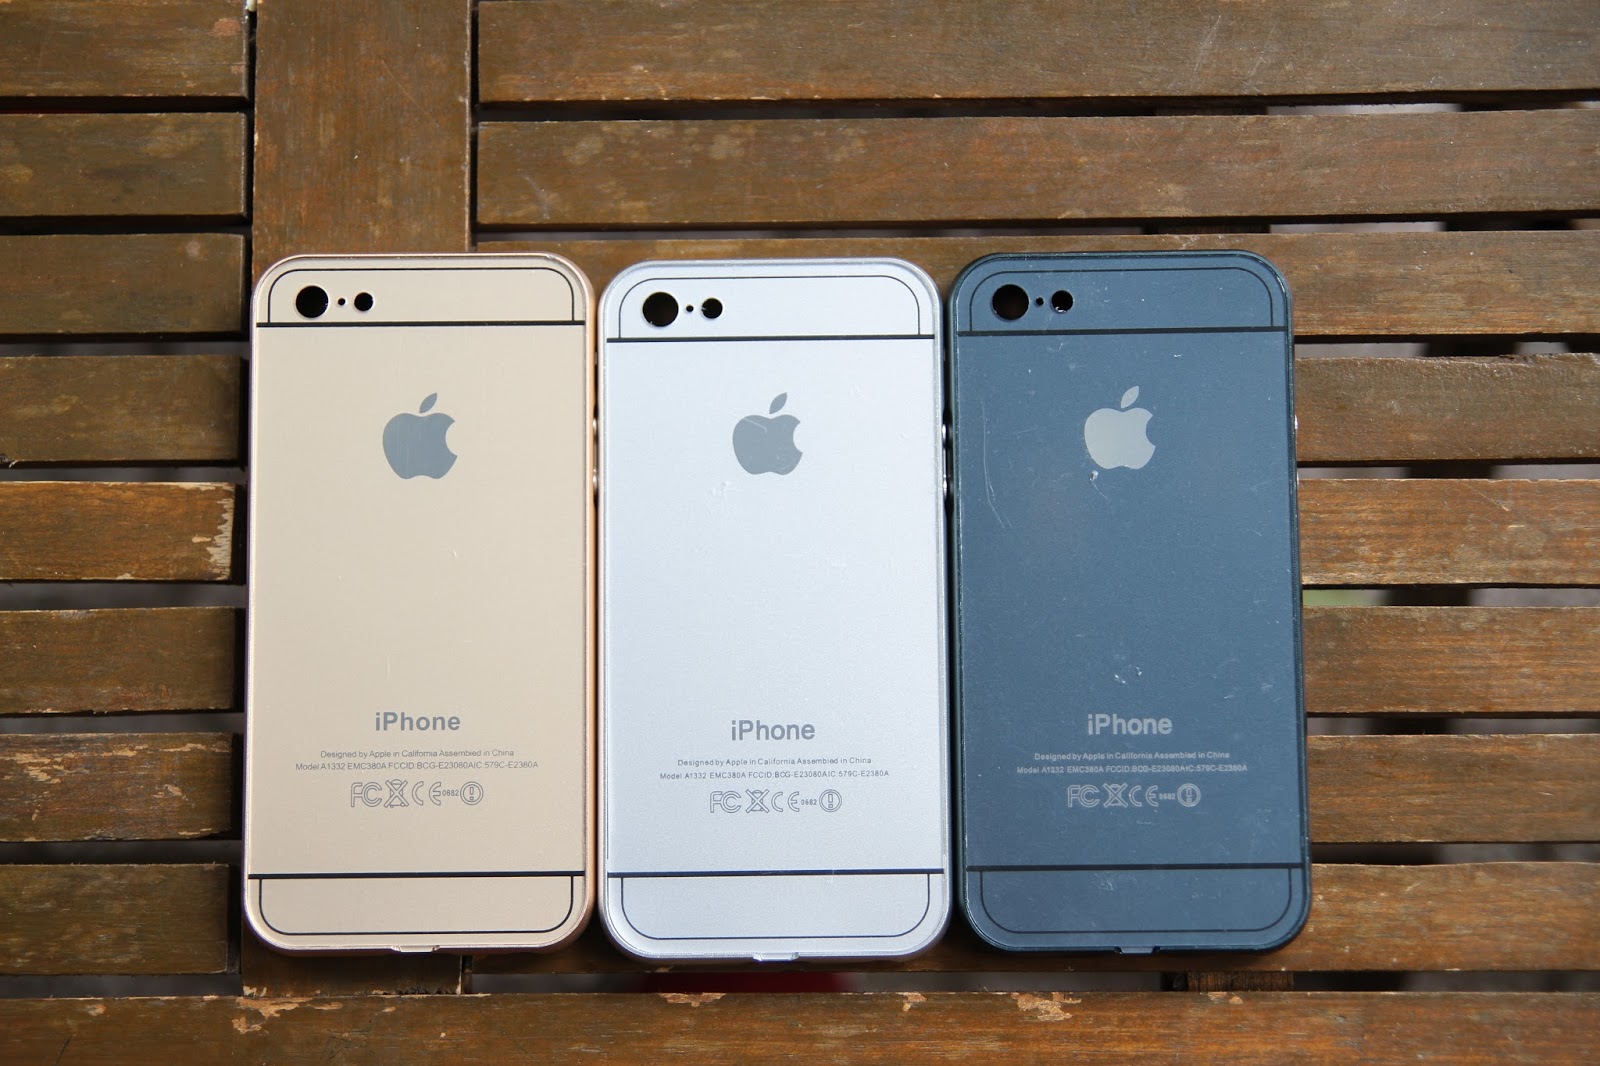 Ốp lưng iPhone 5c giả iphone 5s